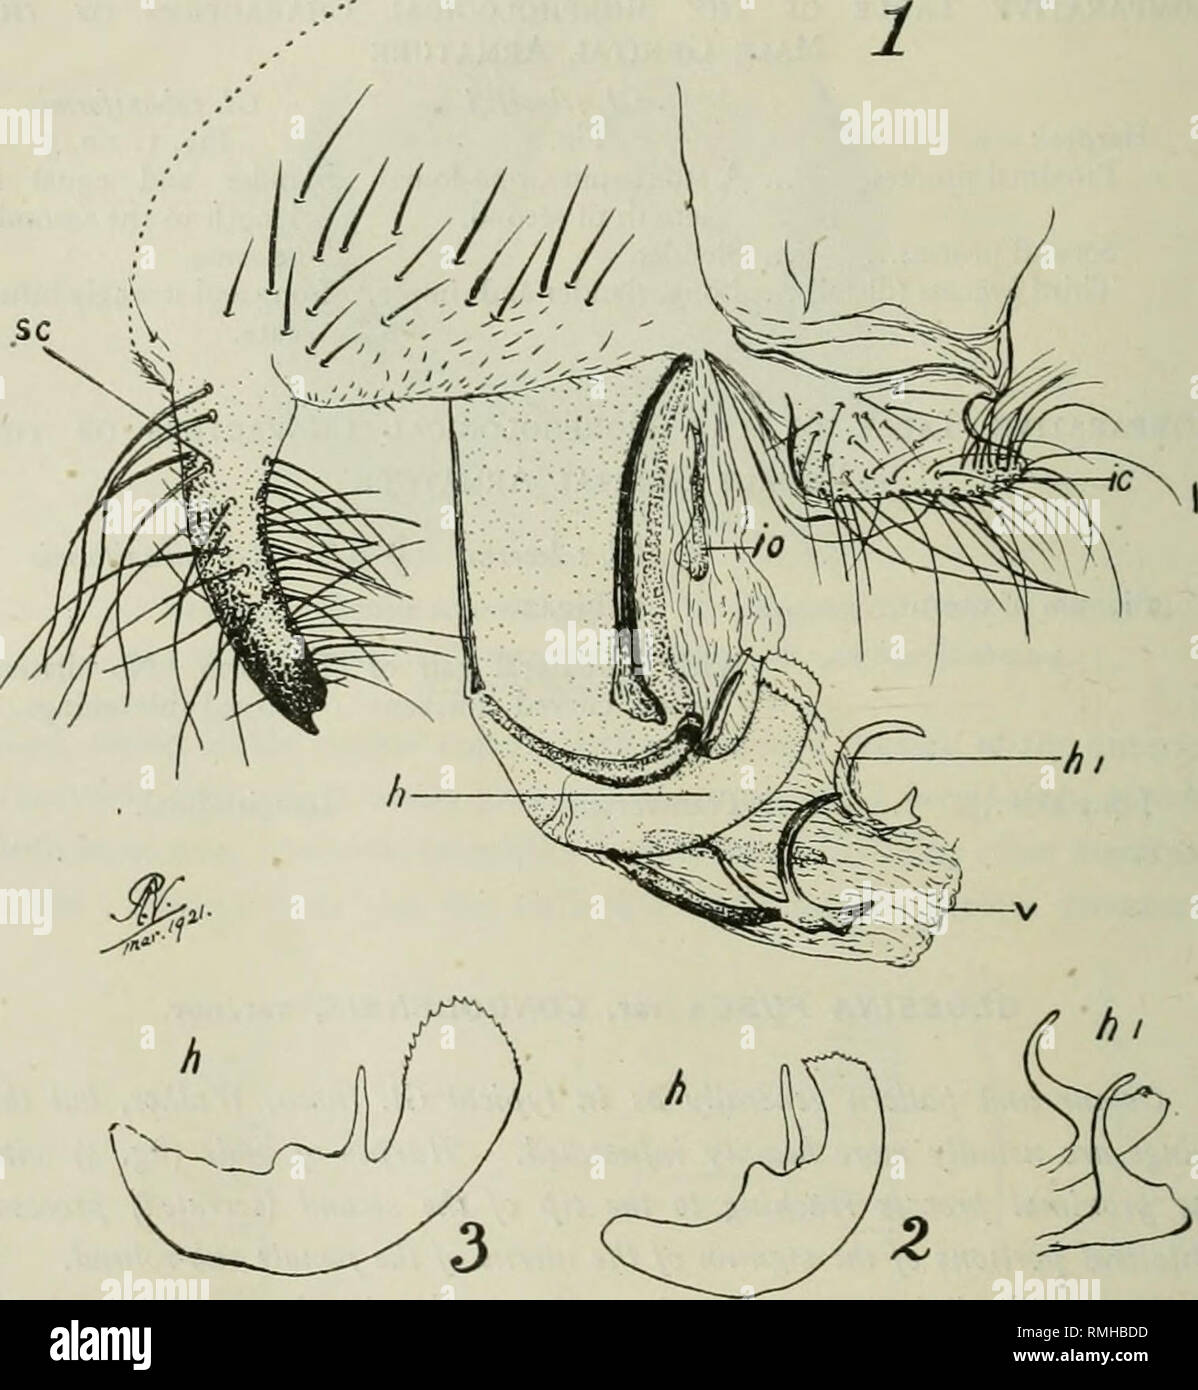 . Annals of tropical medicine and parasitology. Parasites. The foregoing description, and also the iUustrations which accompany it are based upon fourteen examples, representing both sexes, captured in. t MM Fig. 4. (l) and (2) Male armature of Glossinafusca var. rongolensis, var. n. (3) Harpes of Glossitiafusia. I.e., superior clasper ; I'.r.. inferior clasper ; i., vesica; A., harpes; /.o., intromittent organ ; h.!., sickle-shaped process of harpes. the Katompe, and in the Lomami-Kisengwa districts of the Belgian Congo by Dr. J. Schwetz.. Please note that these images are extracted from scan Stock Photo